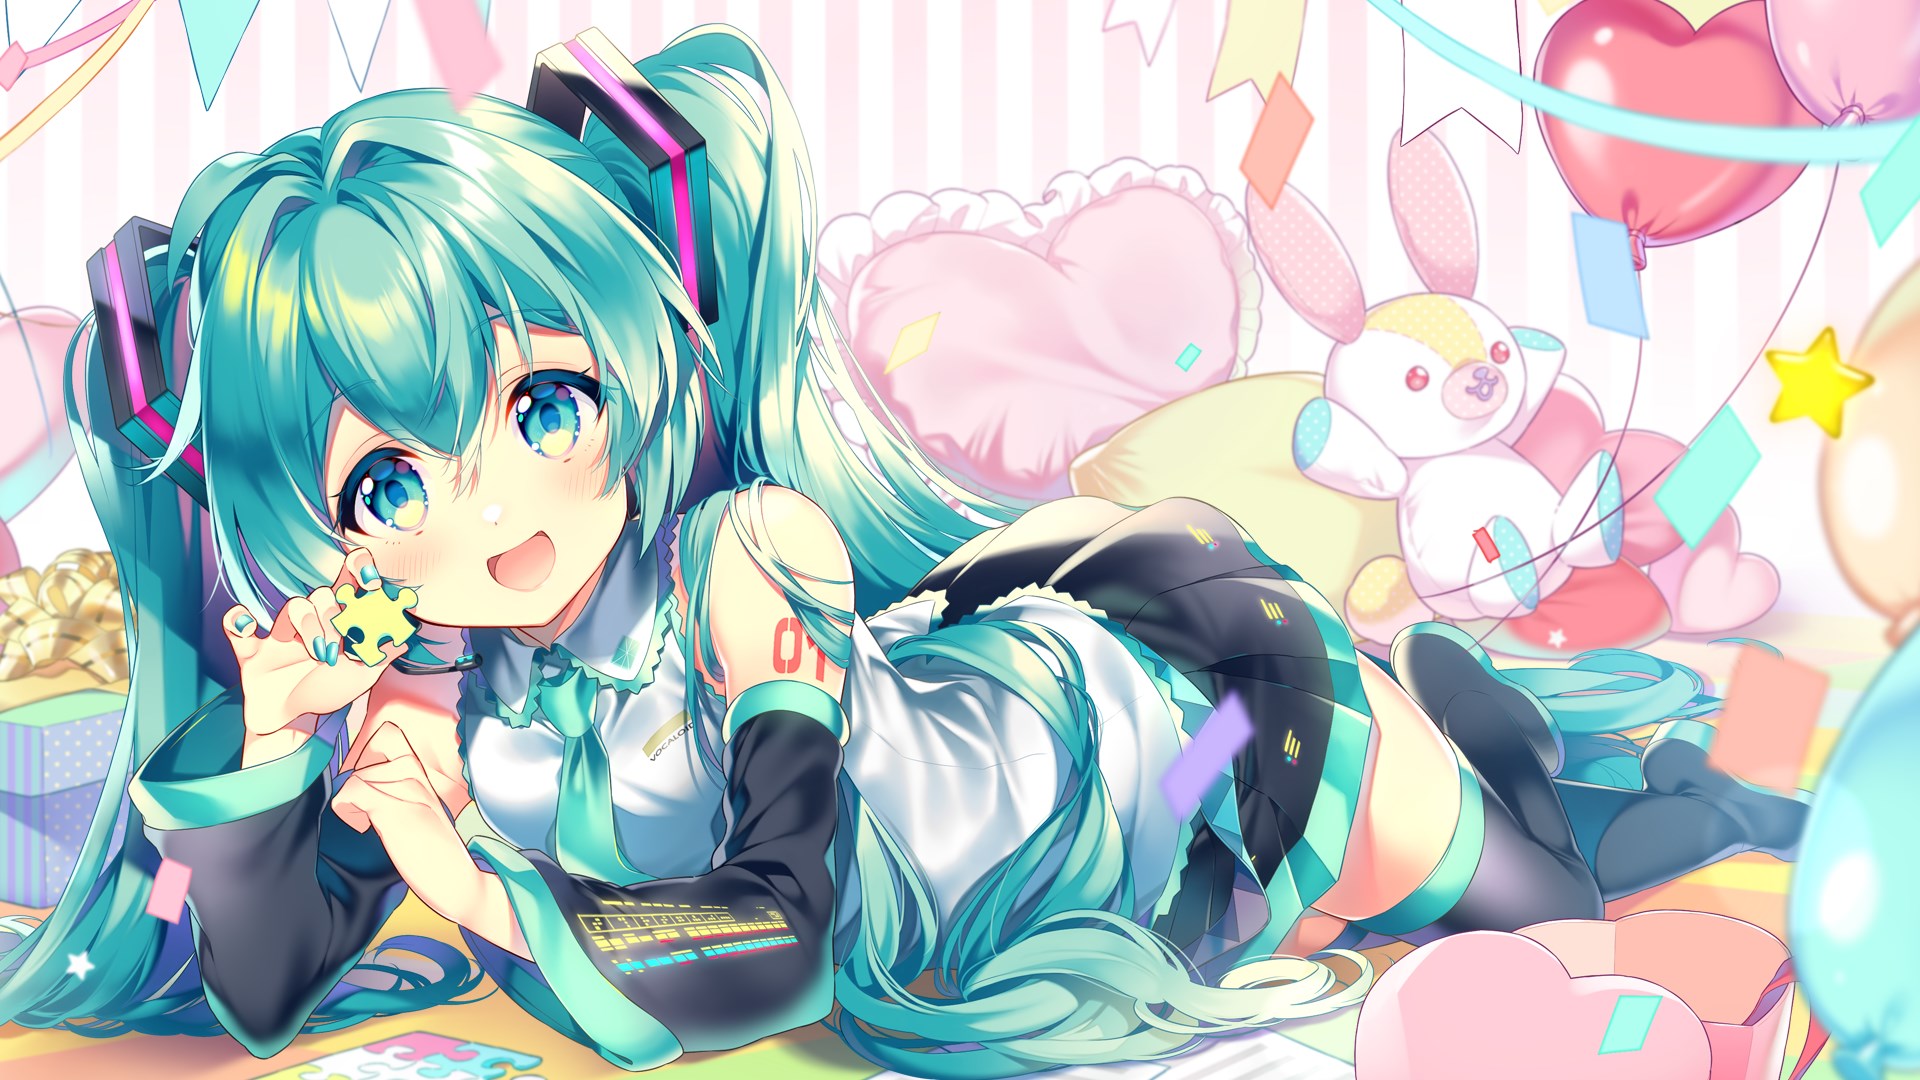 Find the best laptops for Hatsune Miku Jigsaw Puzzle